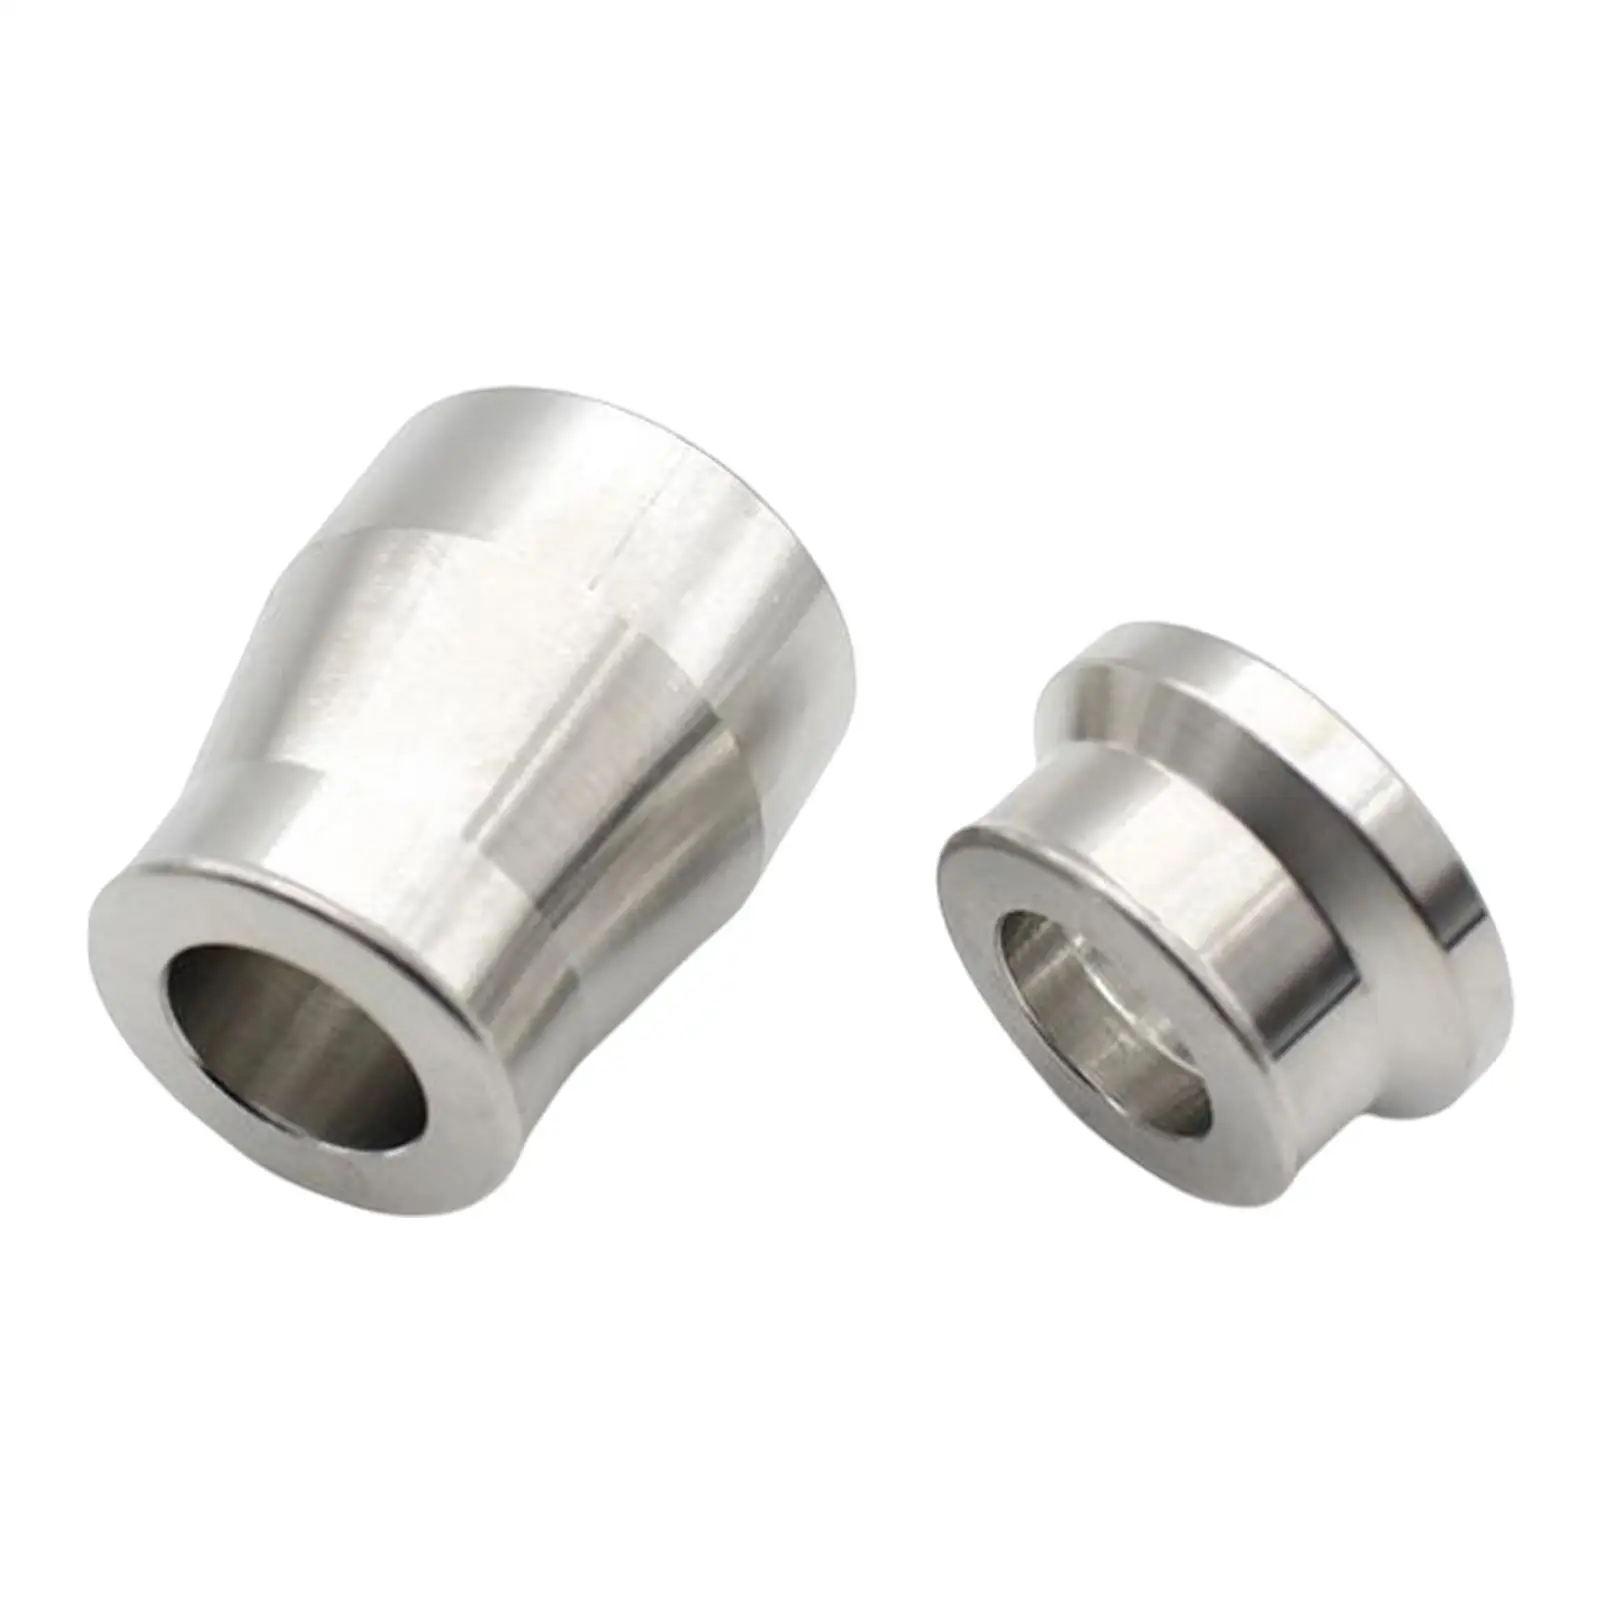 Modified Front Wheel Bushings Accessories Autocycle for Kymco Krv180